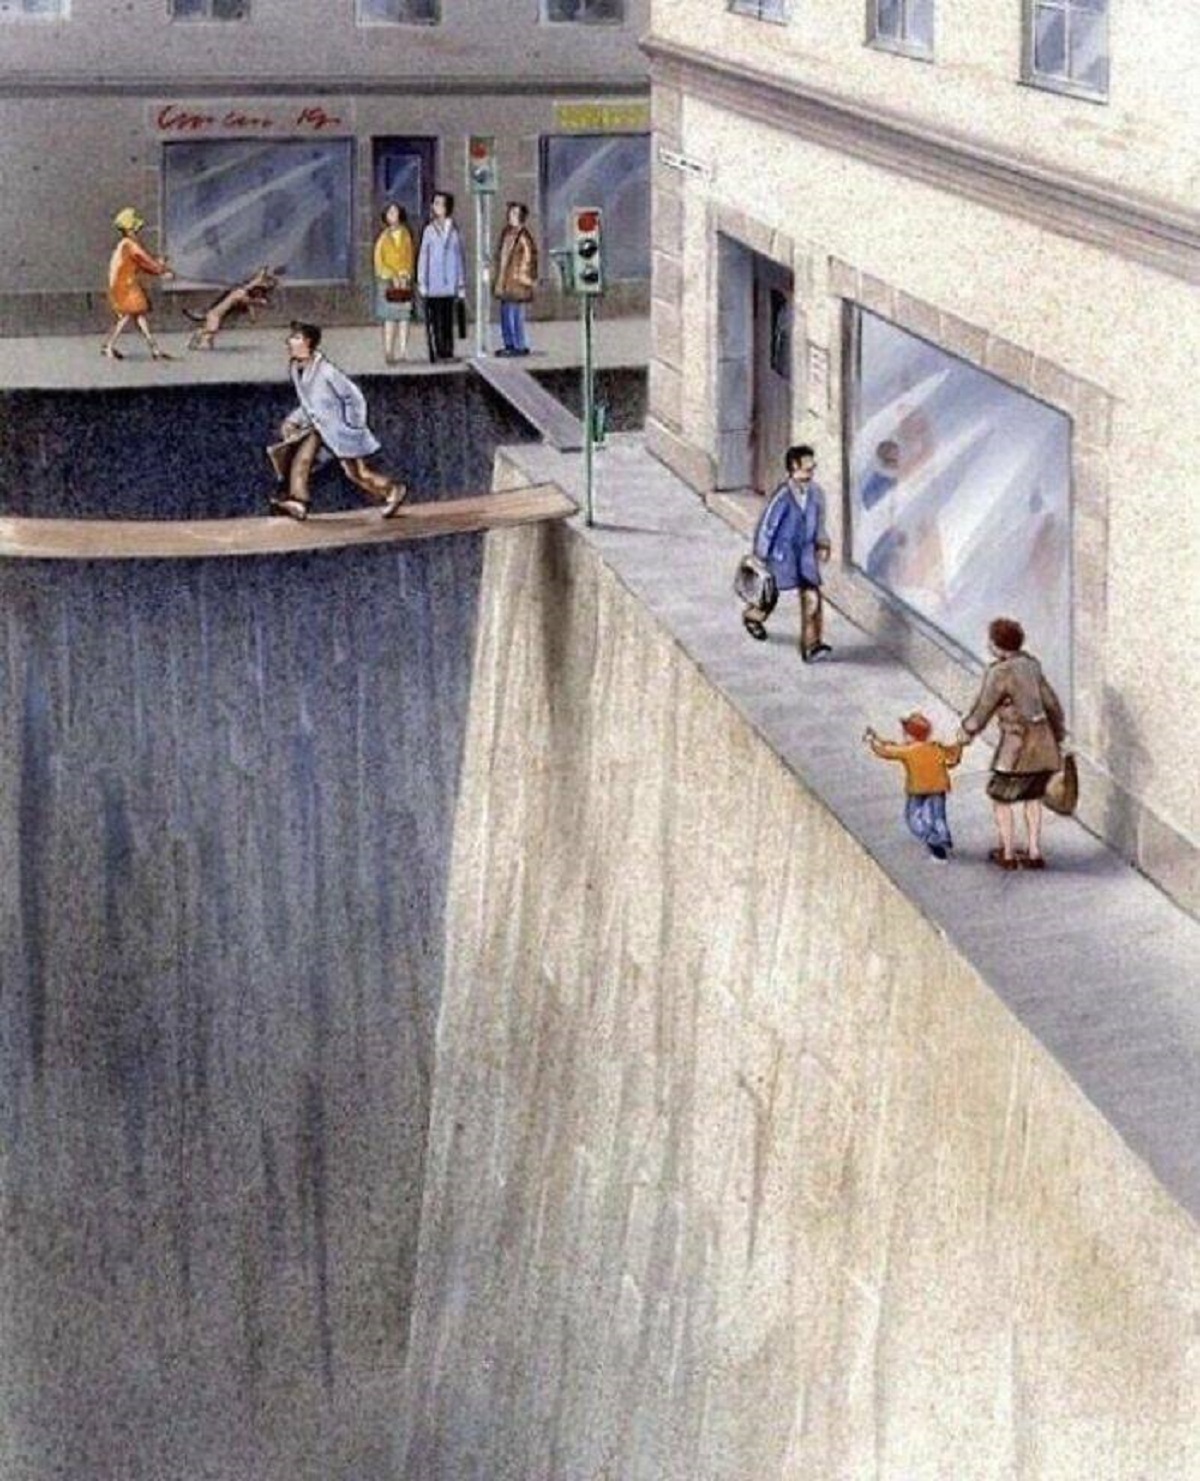 "Over The Years, We Have Allocated A Significant Amount Of Public Space To Accommodate Cars"

"This illustration was created by Swedish artist Karl Jilg, commissioned by the Swedish Road Administration, to visually represent the extent of public space that has been dedicated to car-related infrastructure and transportation."